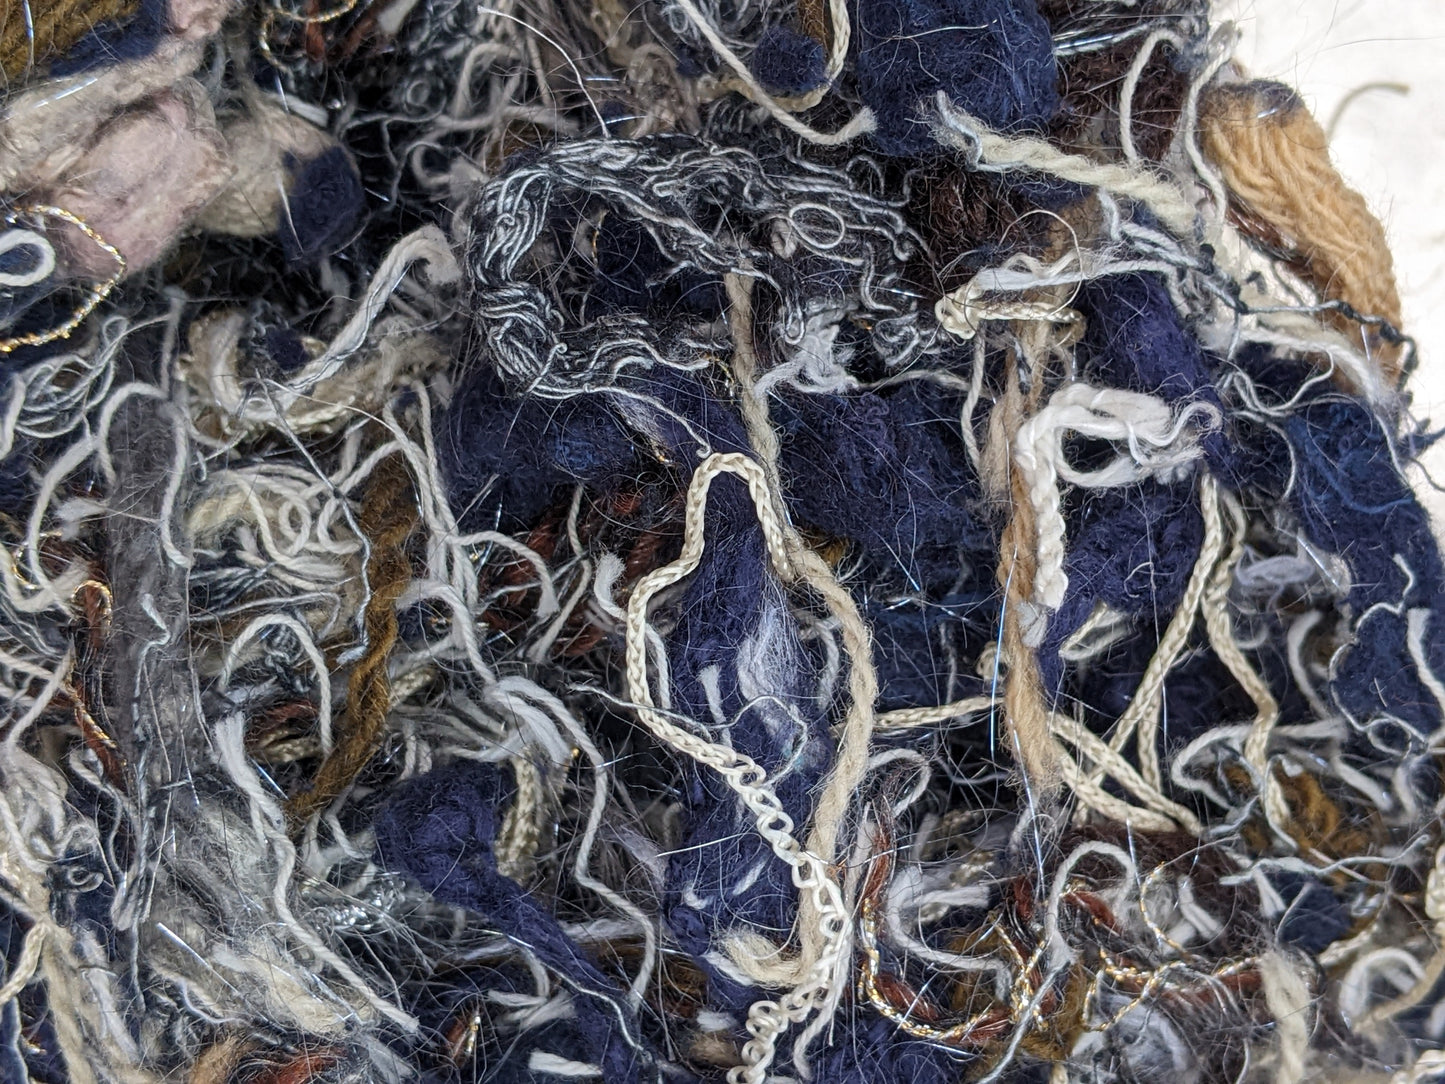 HOKUSAI Luxury Recycled Fiber Thread Texture Blend for Carding 3 oz